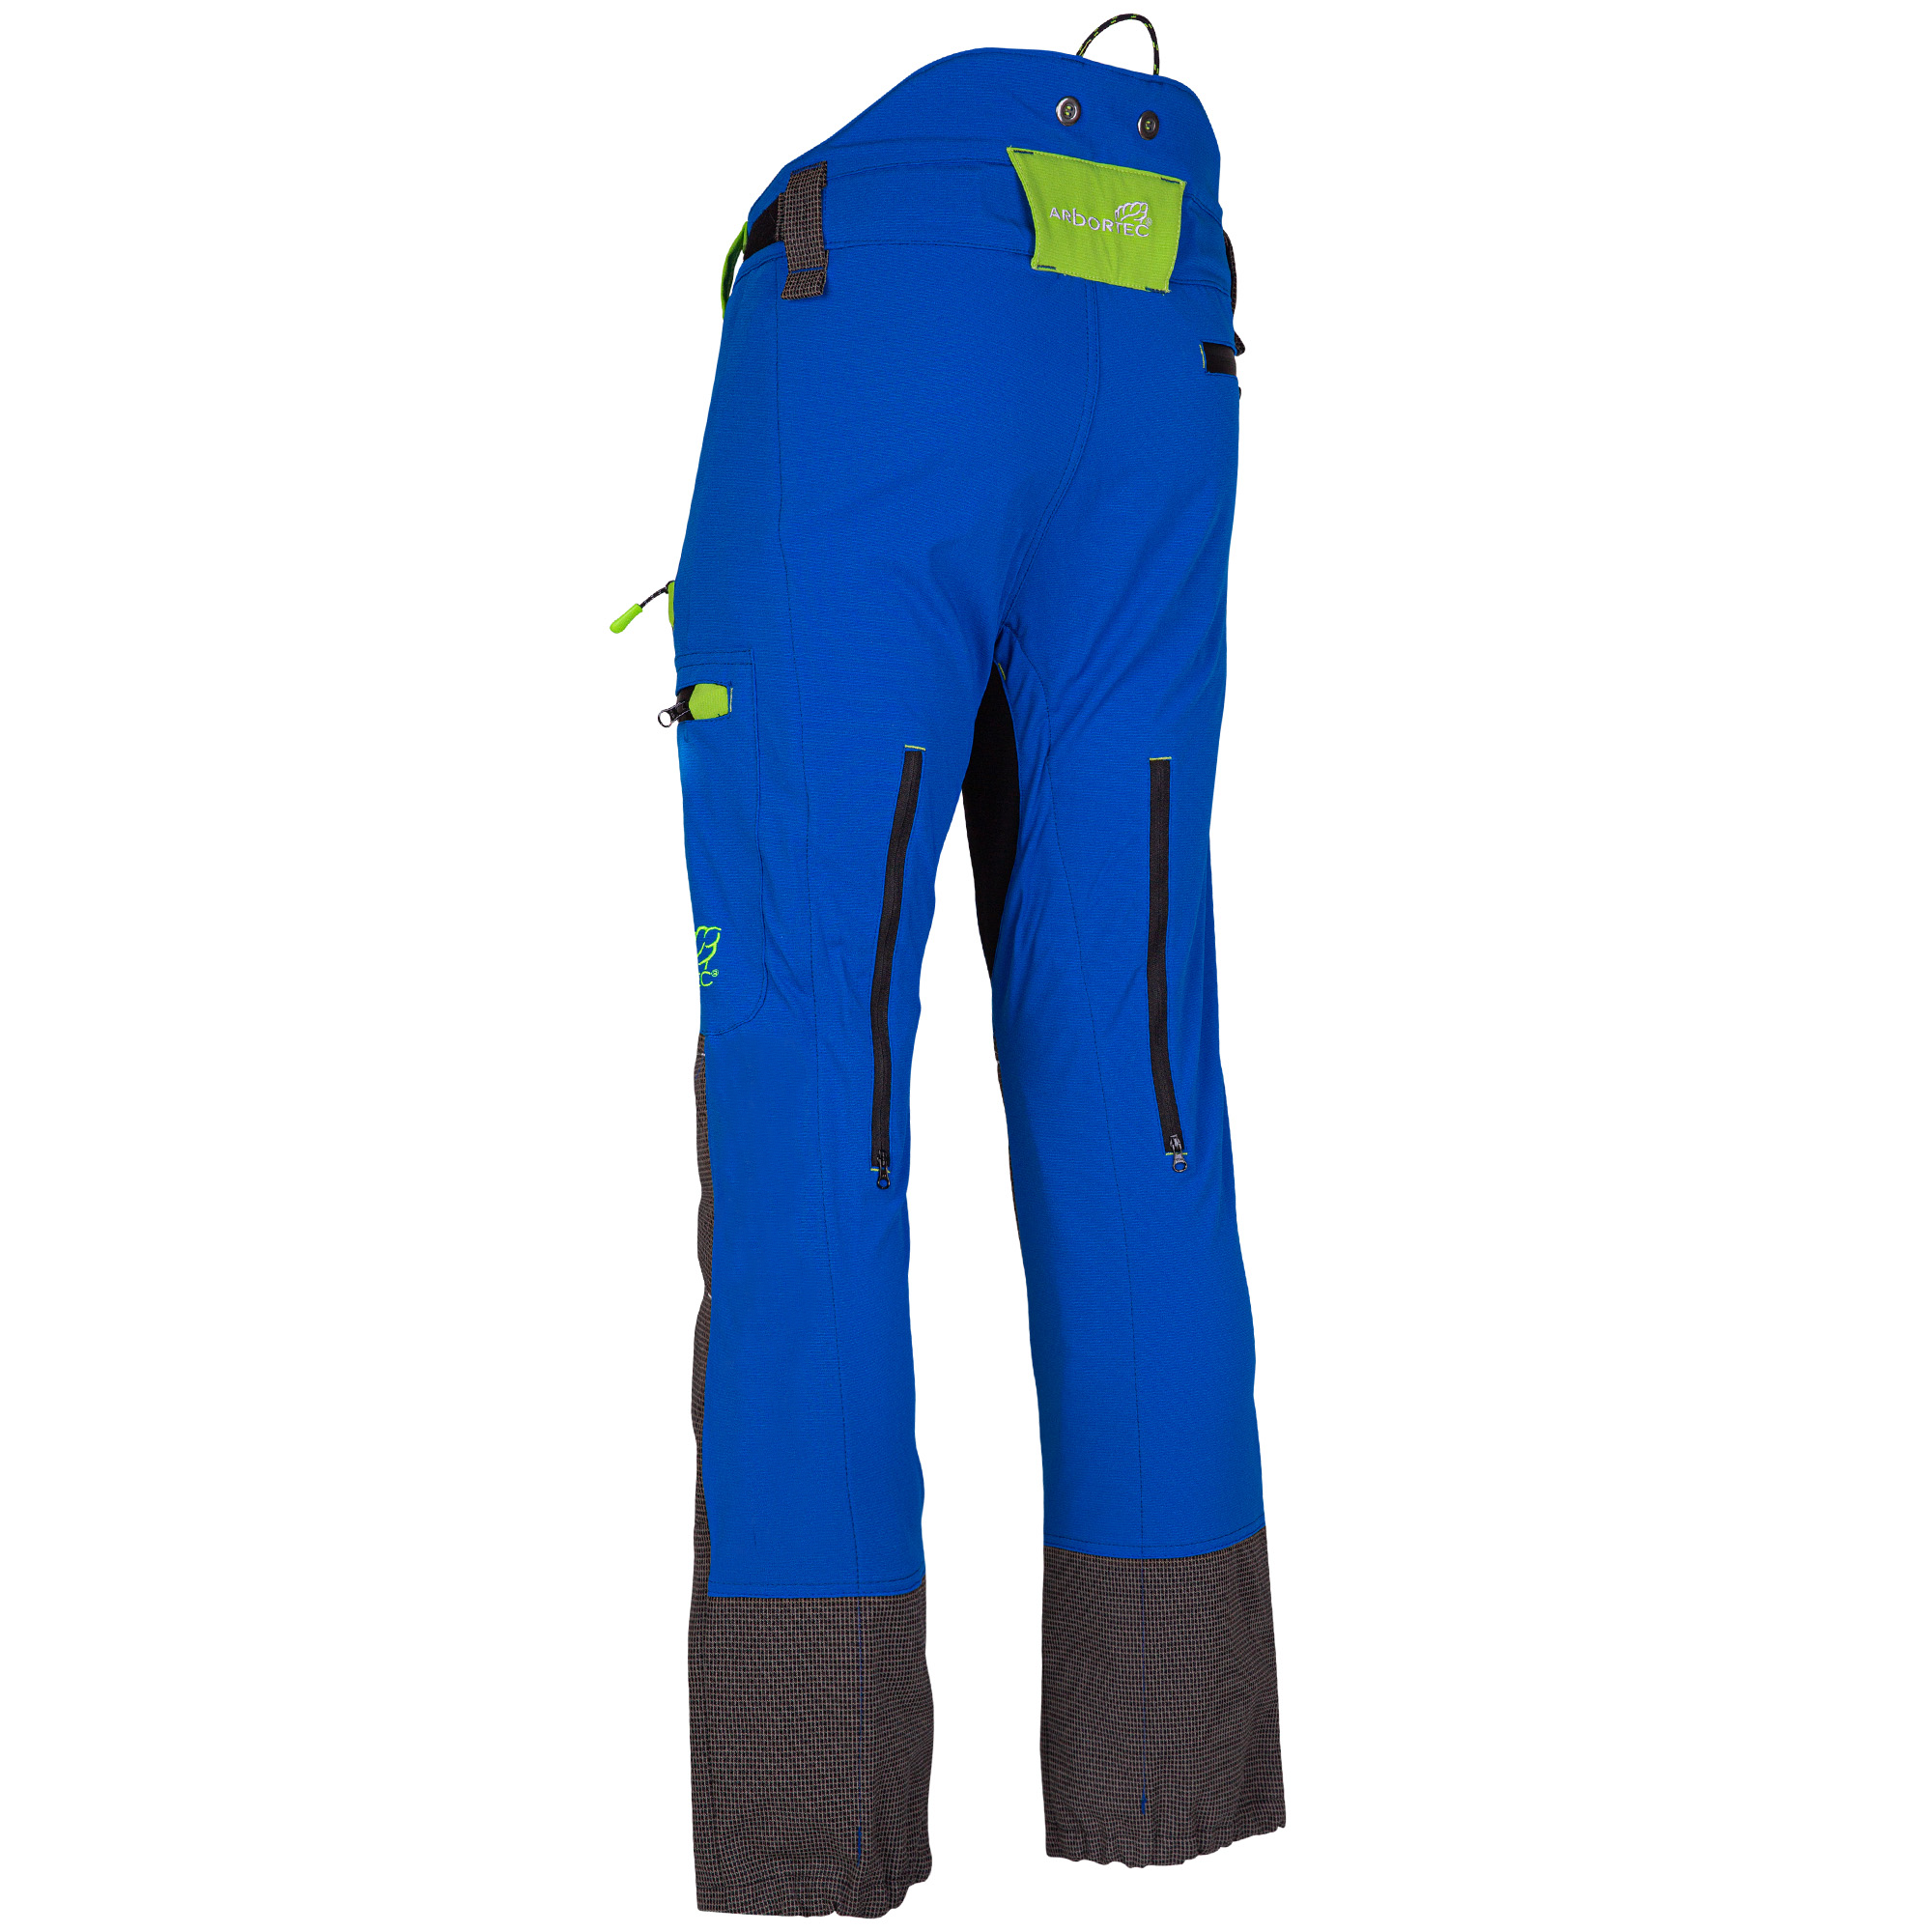 AT4060 Breatheflex Pro Chainsaw Trousers Design A Class 1 - Blue